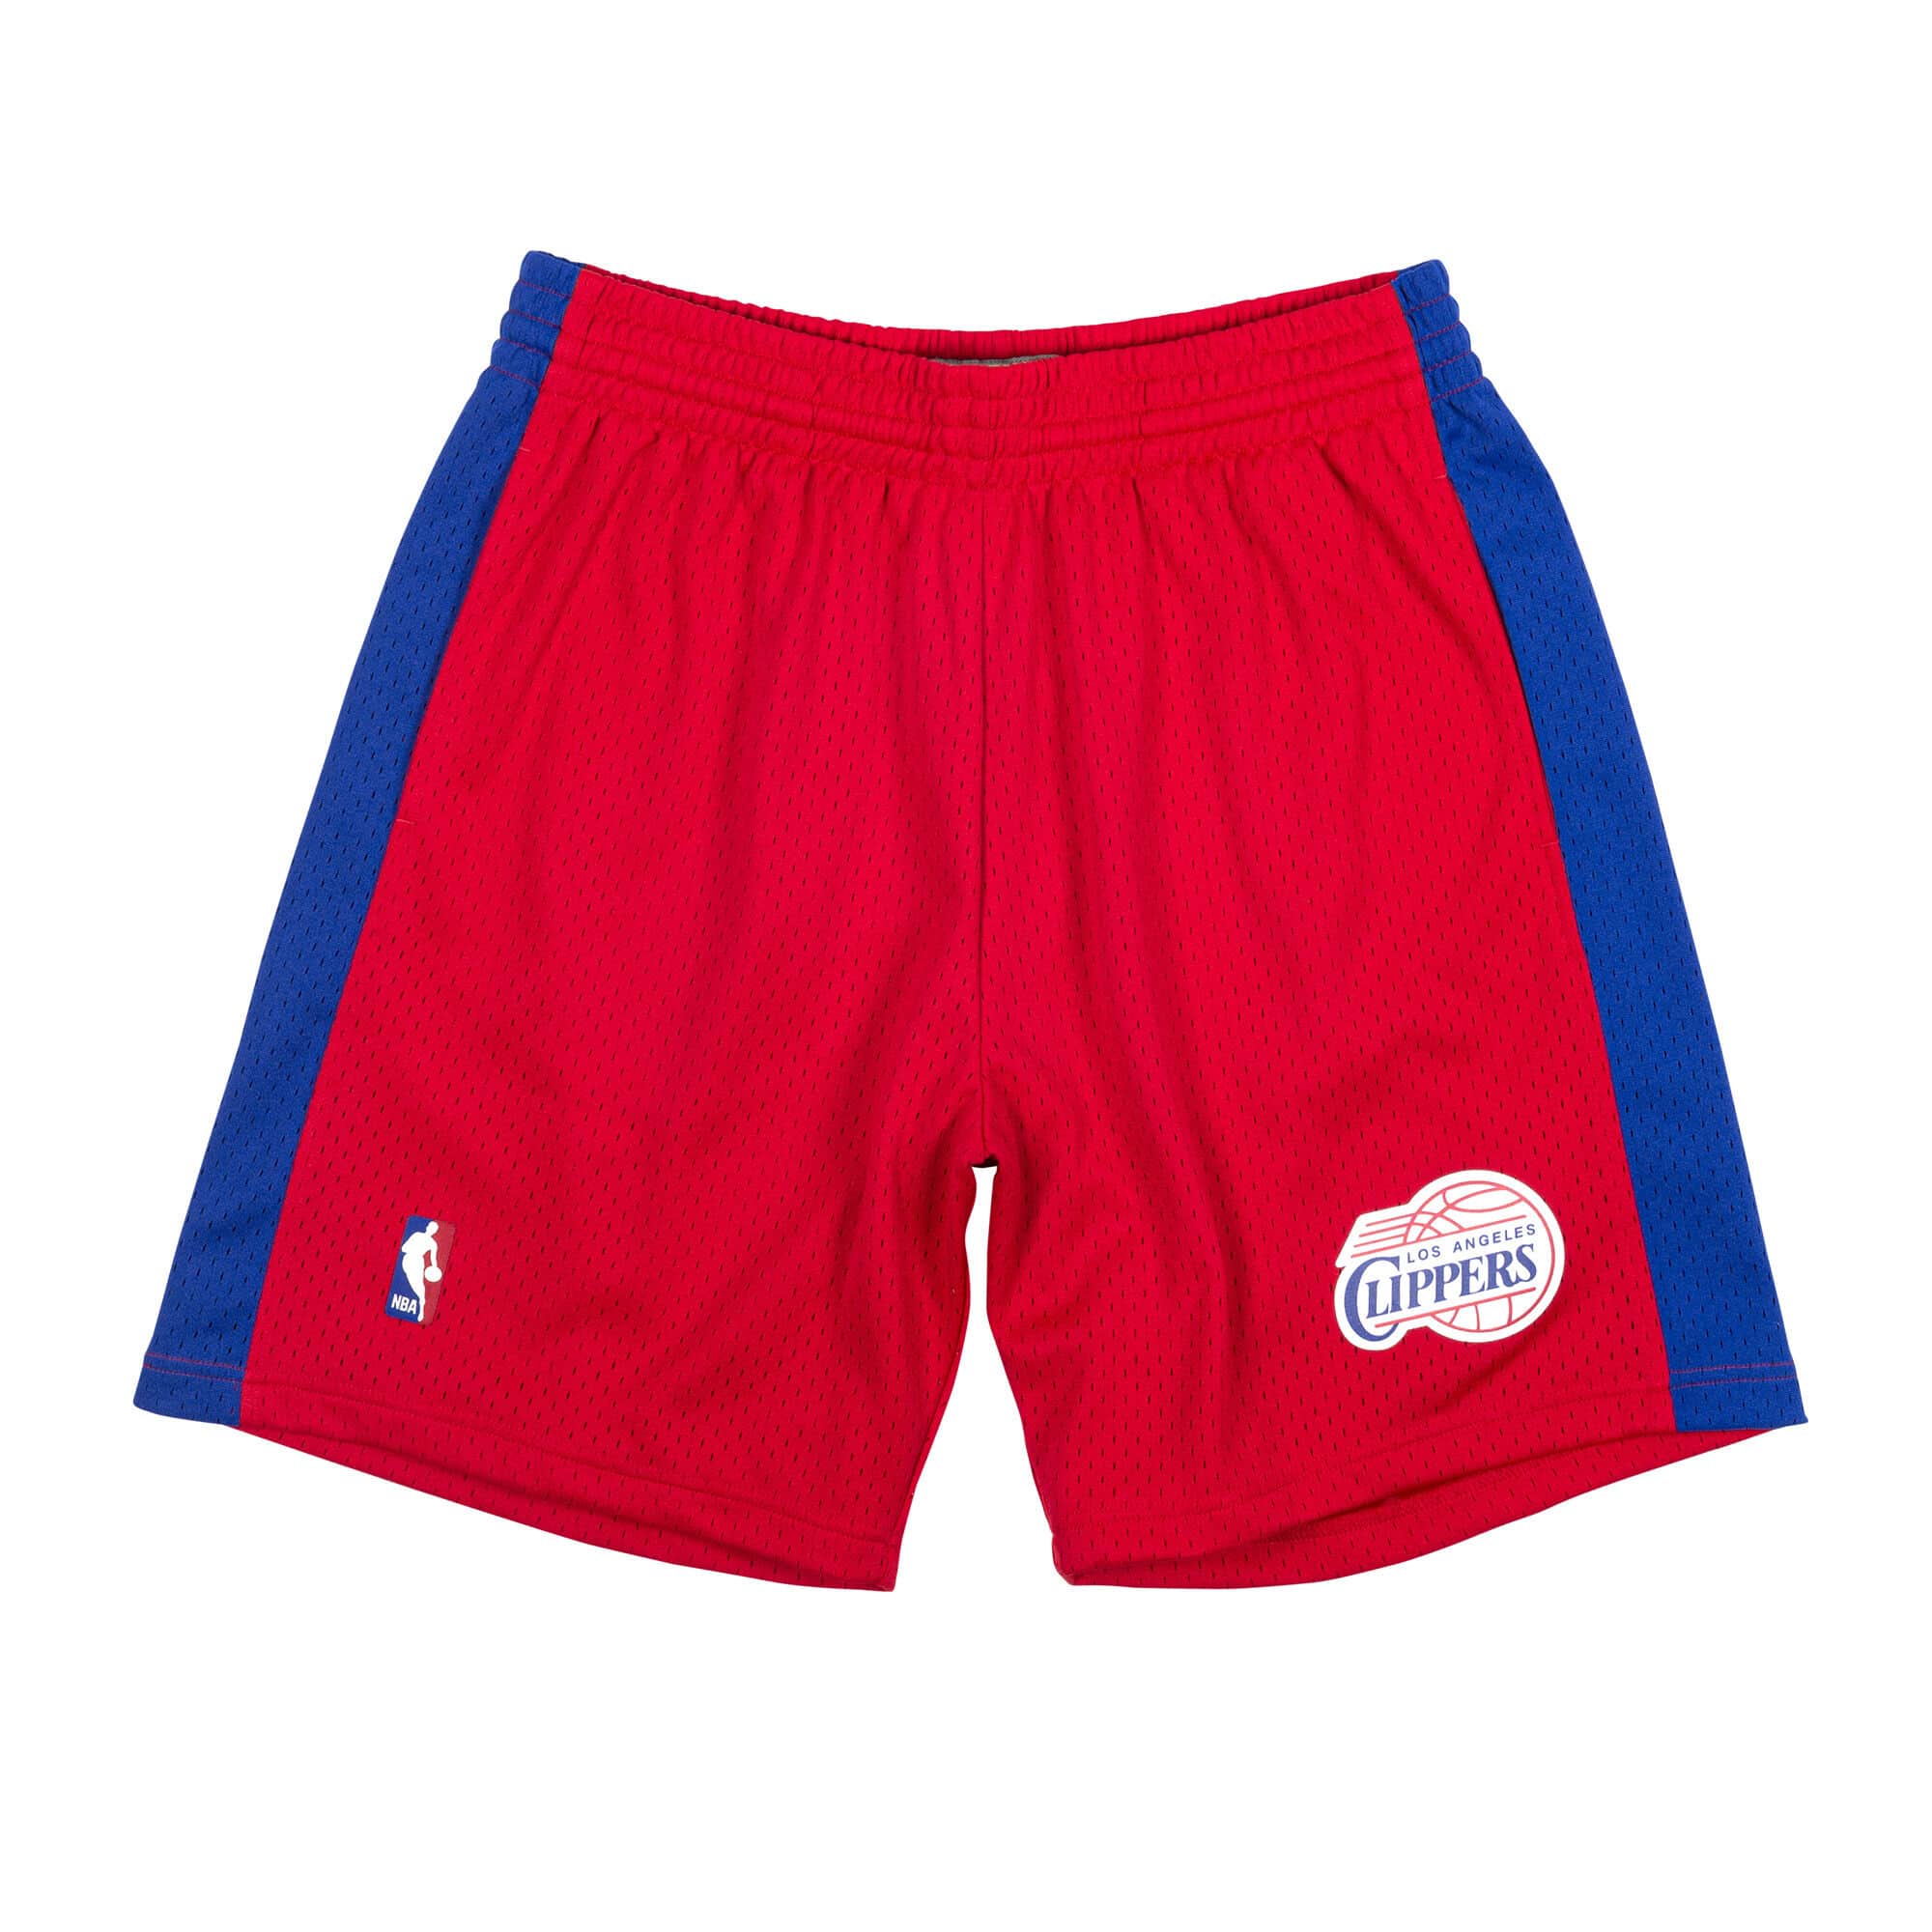 2000-01 Red Los Angeles Clippers Mitchell & Ness Hardwood Classics Swingman Shorts